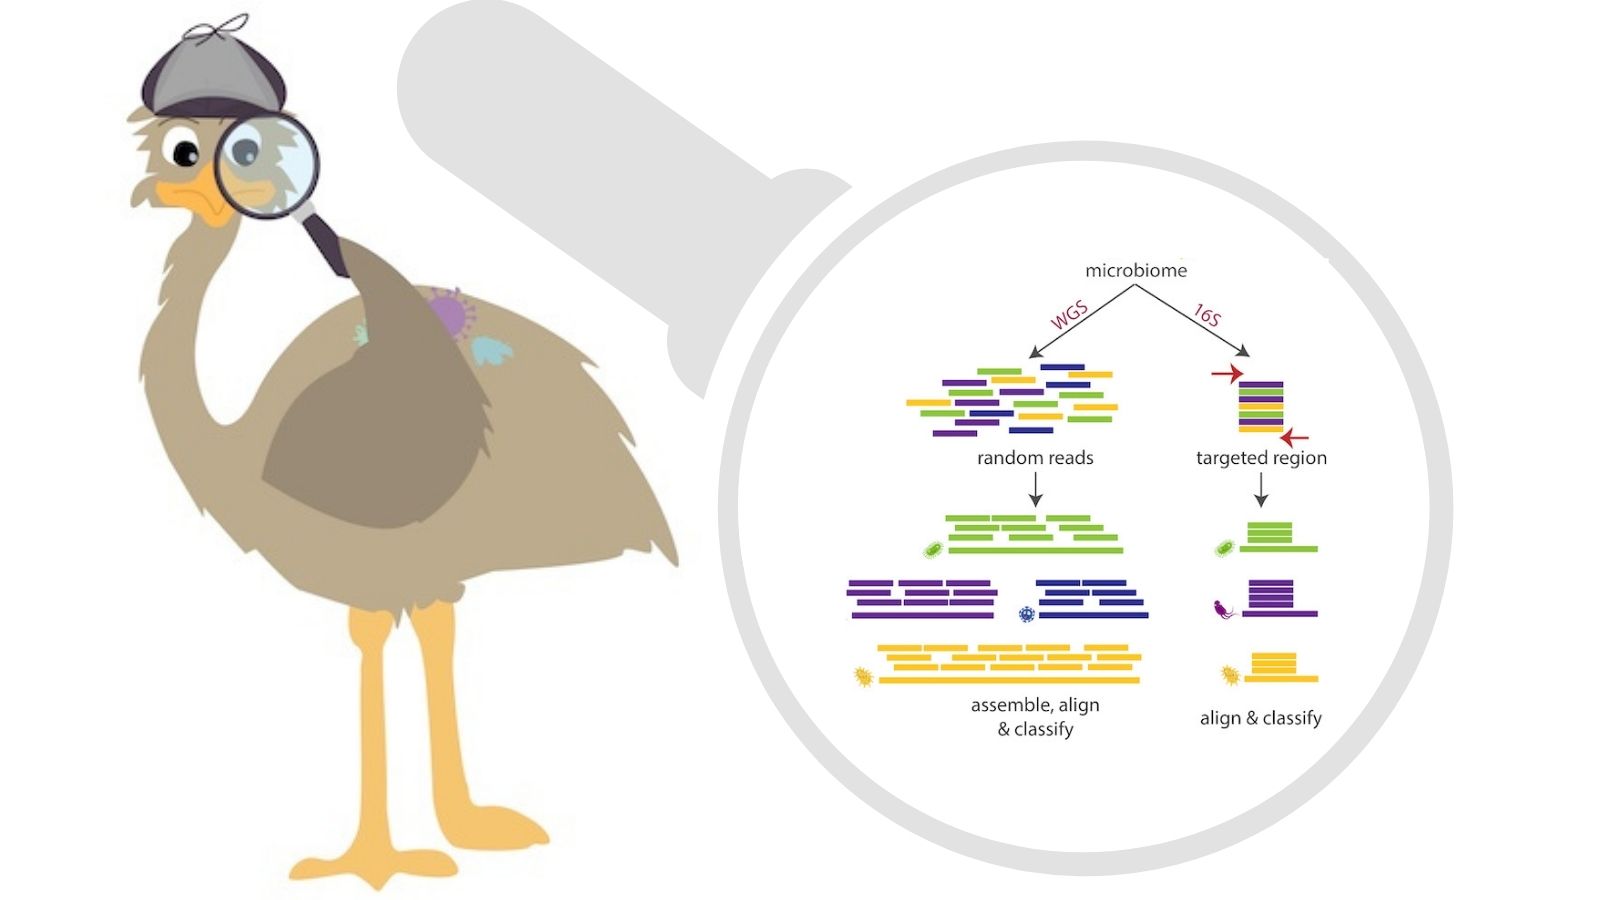 Emu stands tall at detecting bacteria species